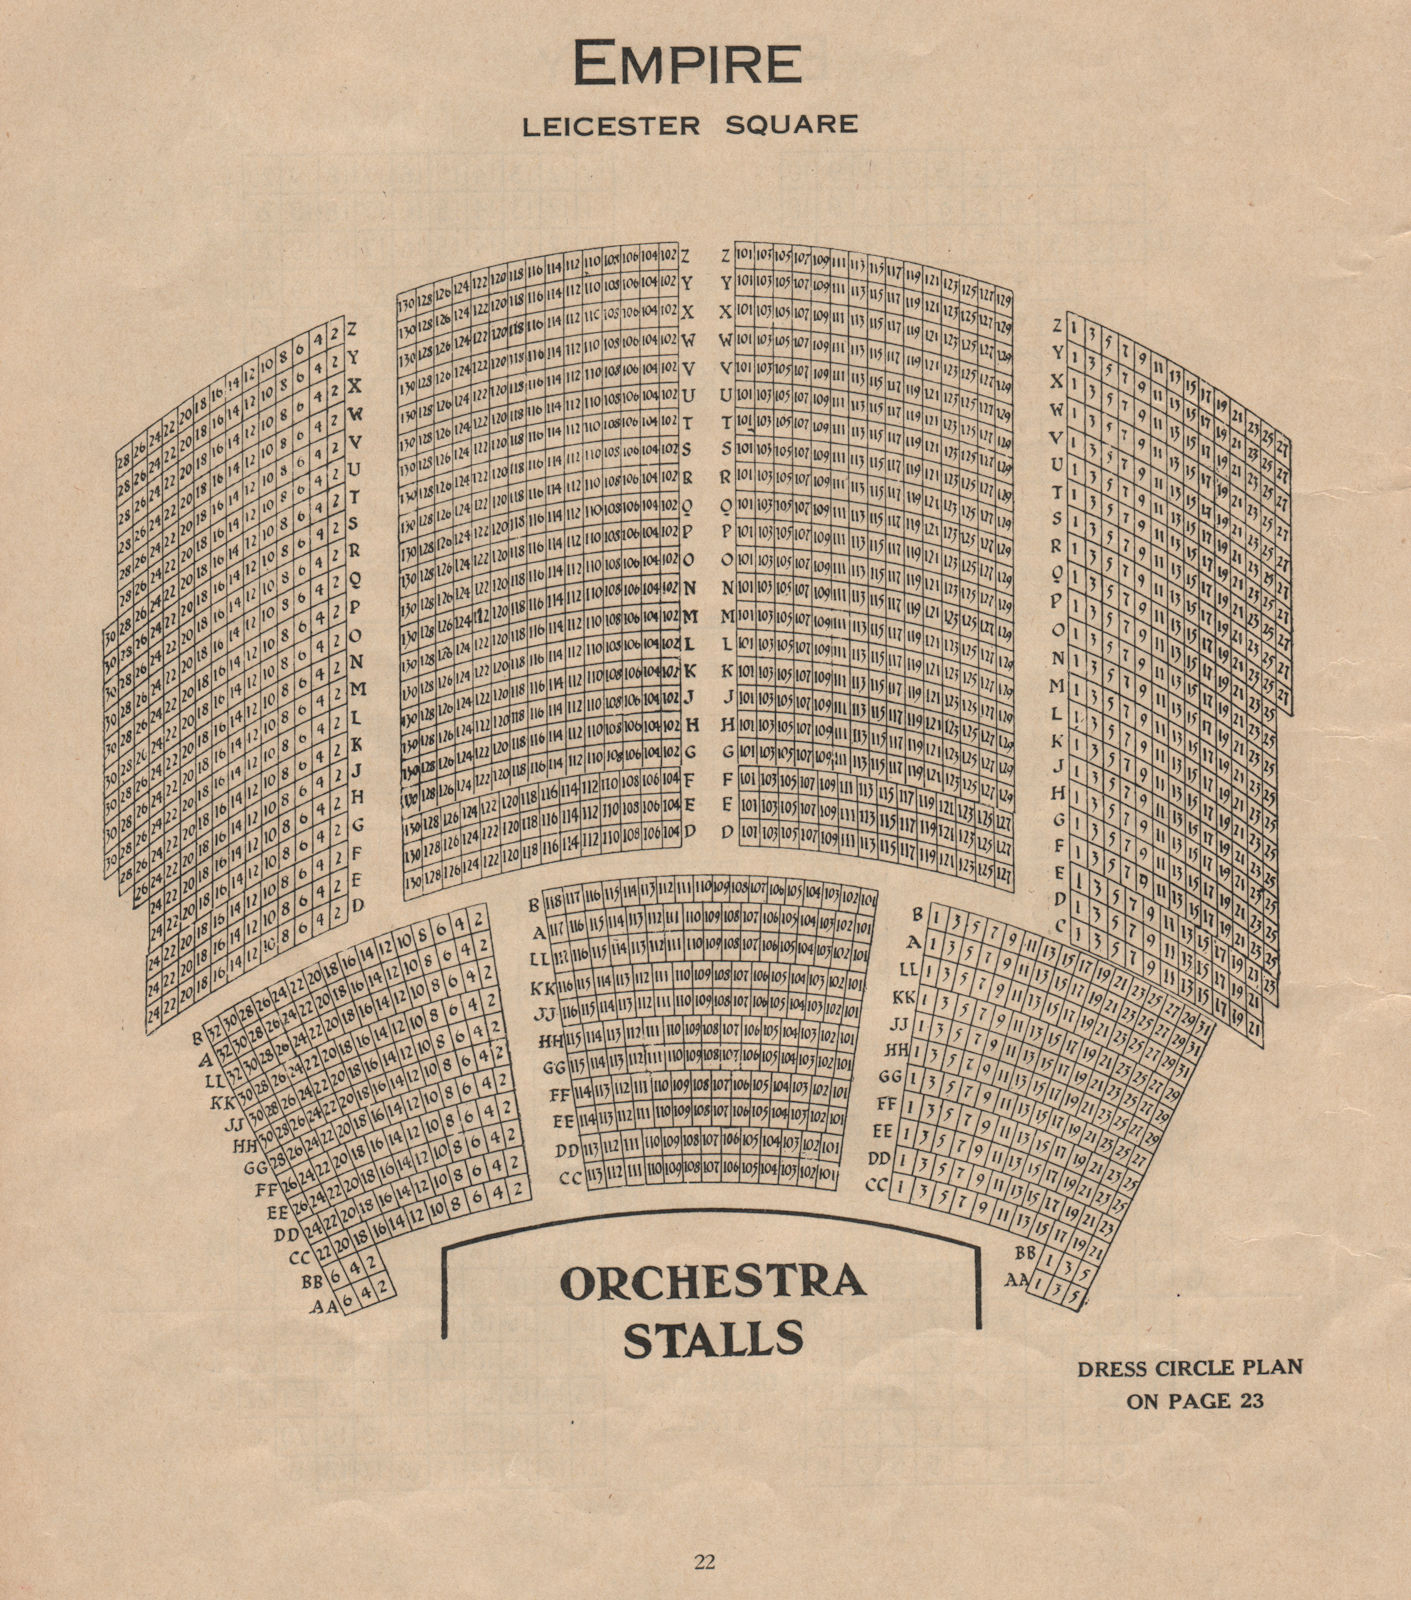 Associate Product EMPIRE LEICESTER SQUARE. Vintage seating plan. Orchestra Stalls. West End 1936